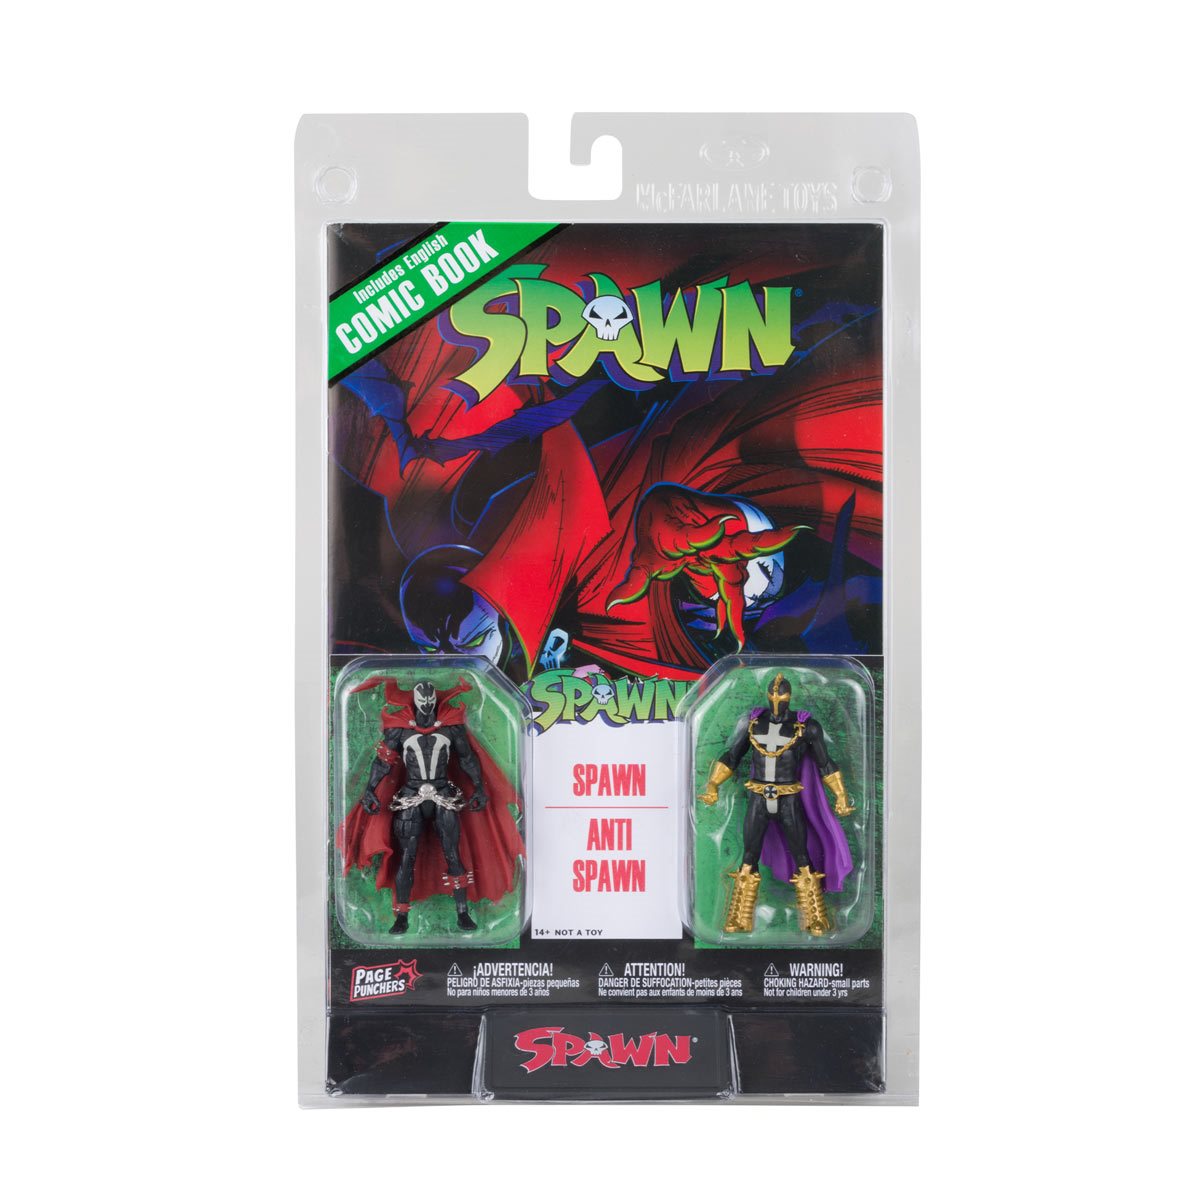 Spawn Page Puncher - WV1 - Spawn and Anti-Spawn Action Figure (Spawn #1) 3IN Figure with Comic 2PK